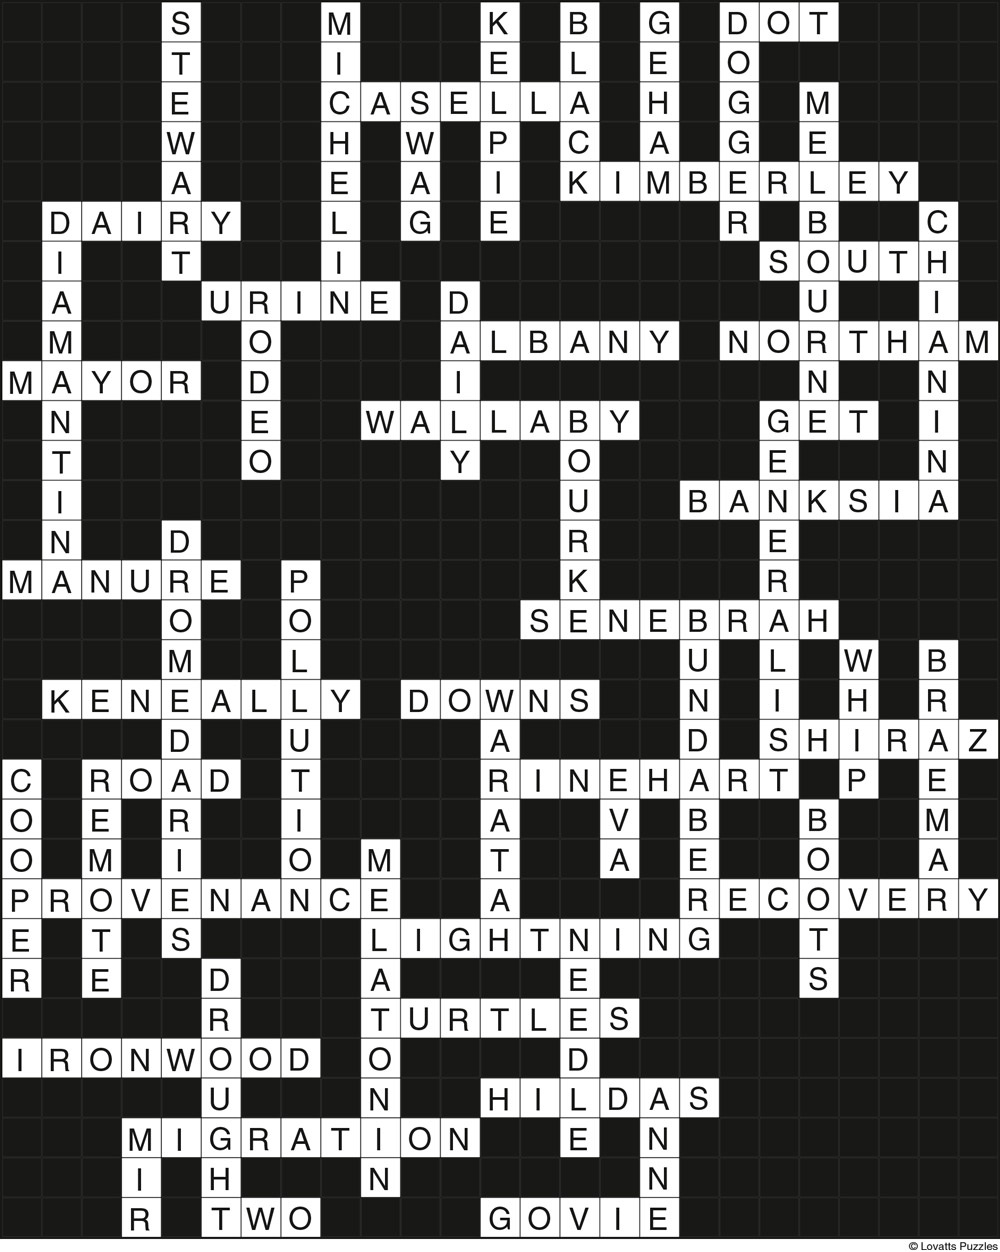 OUTBACK-CROSSWORD63_SOL